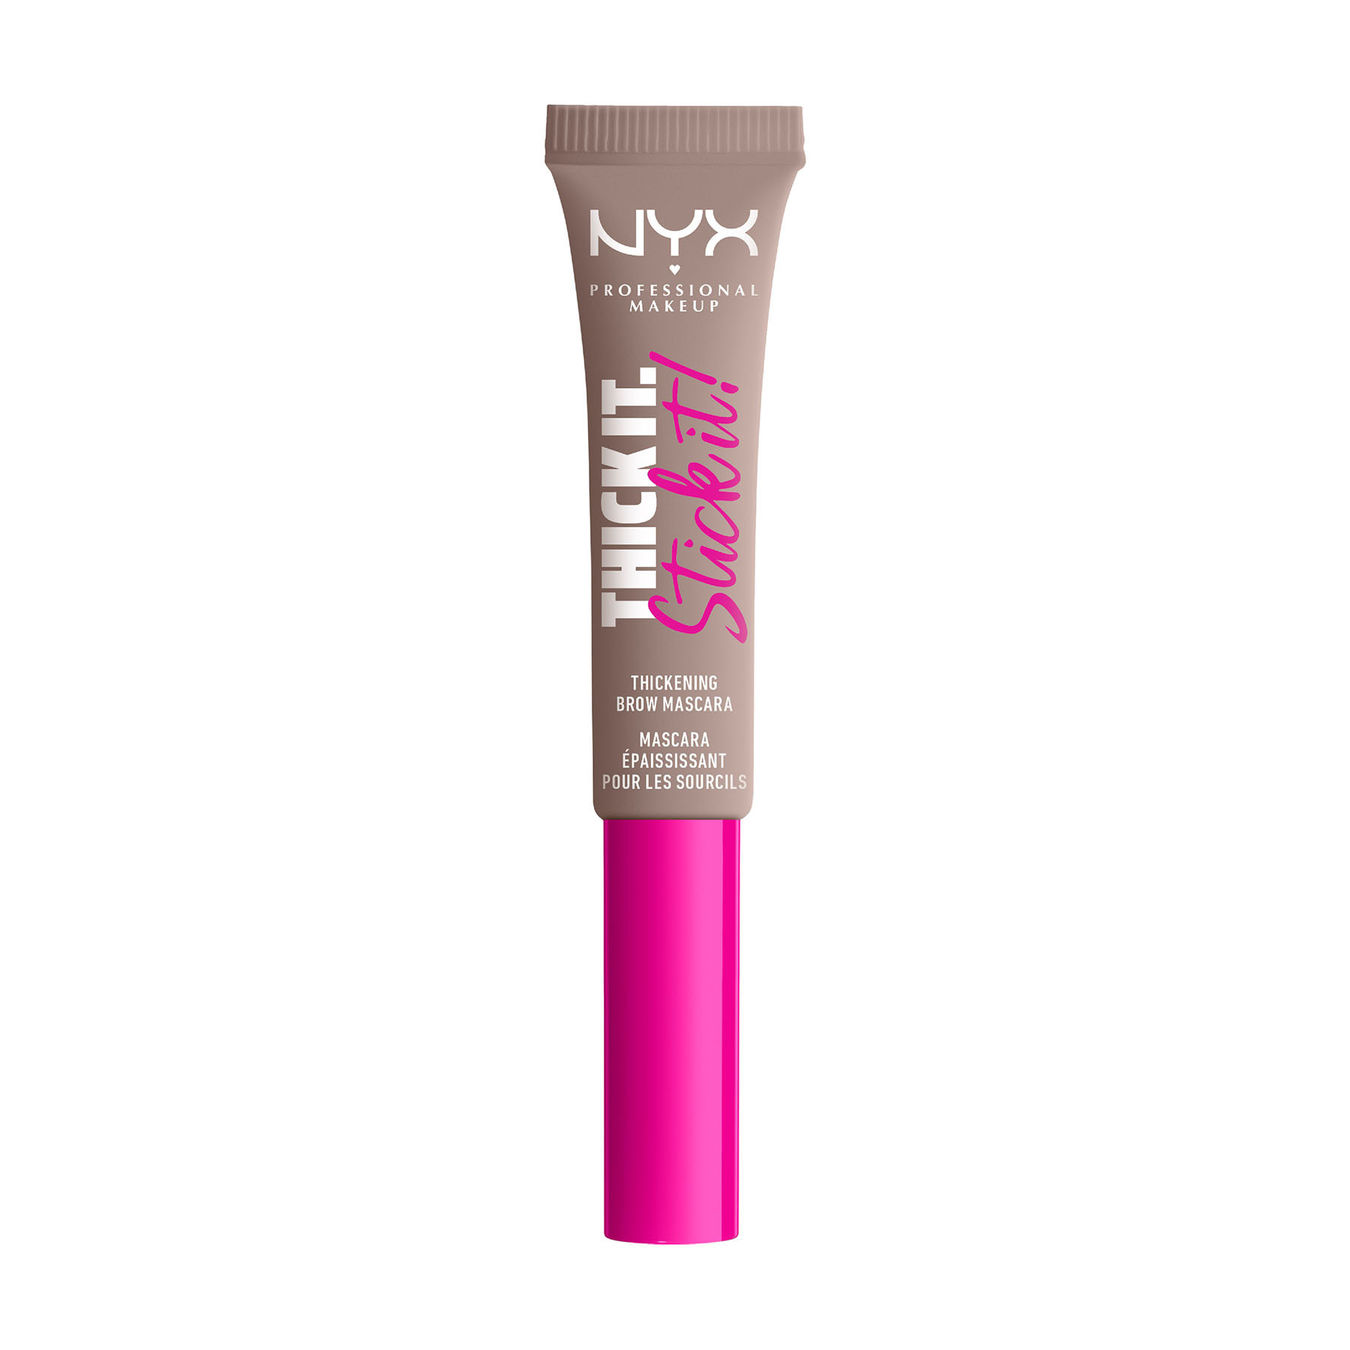 NYX Professional Makeup THICK IT. STICK IT! Brow Mascara 1ST von NYX Professional Makeup